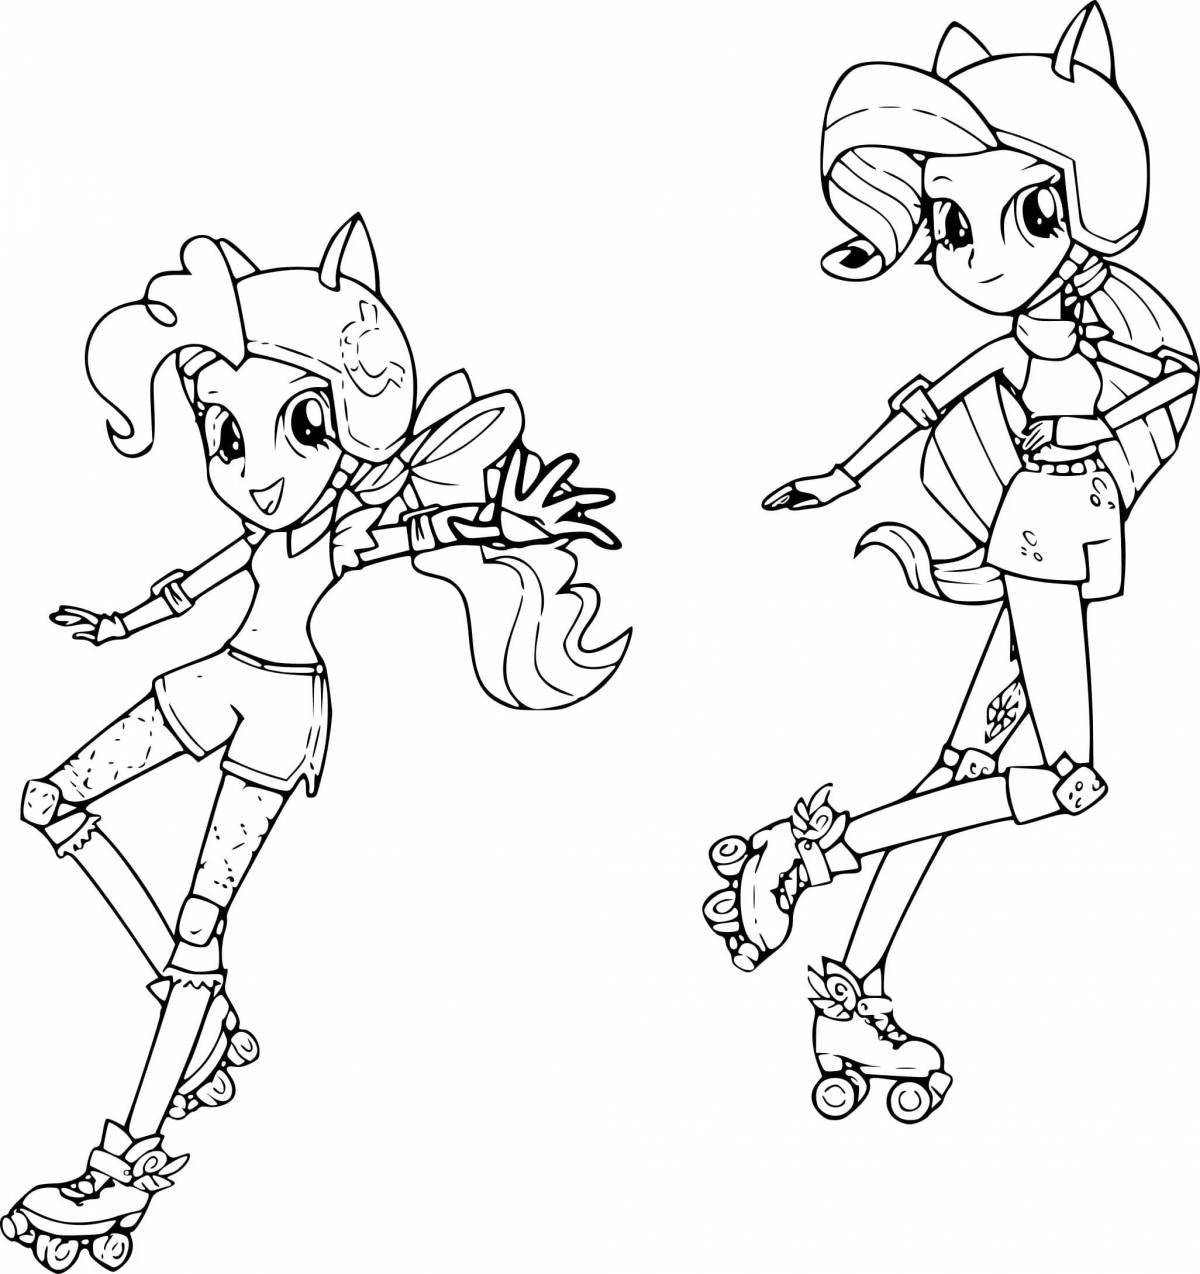 Dazzling pony playtime coloring page